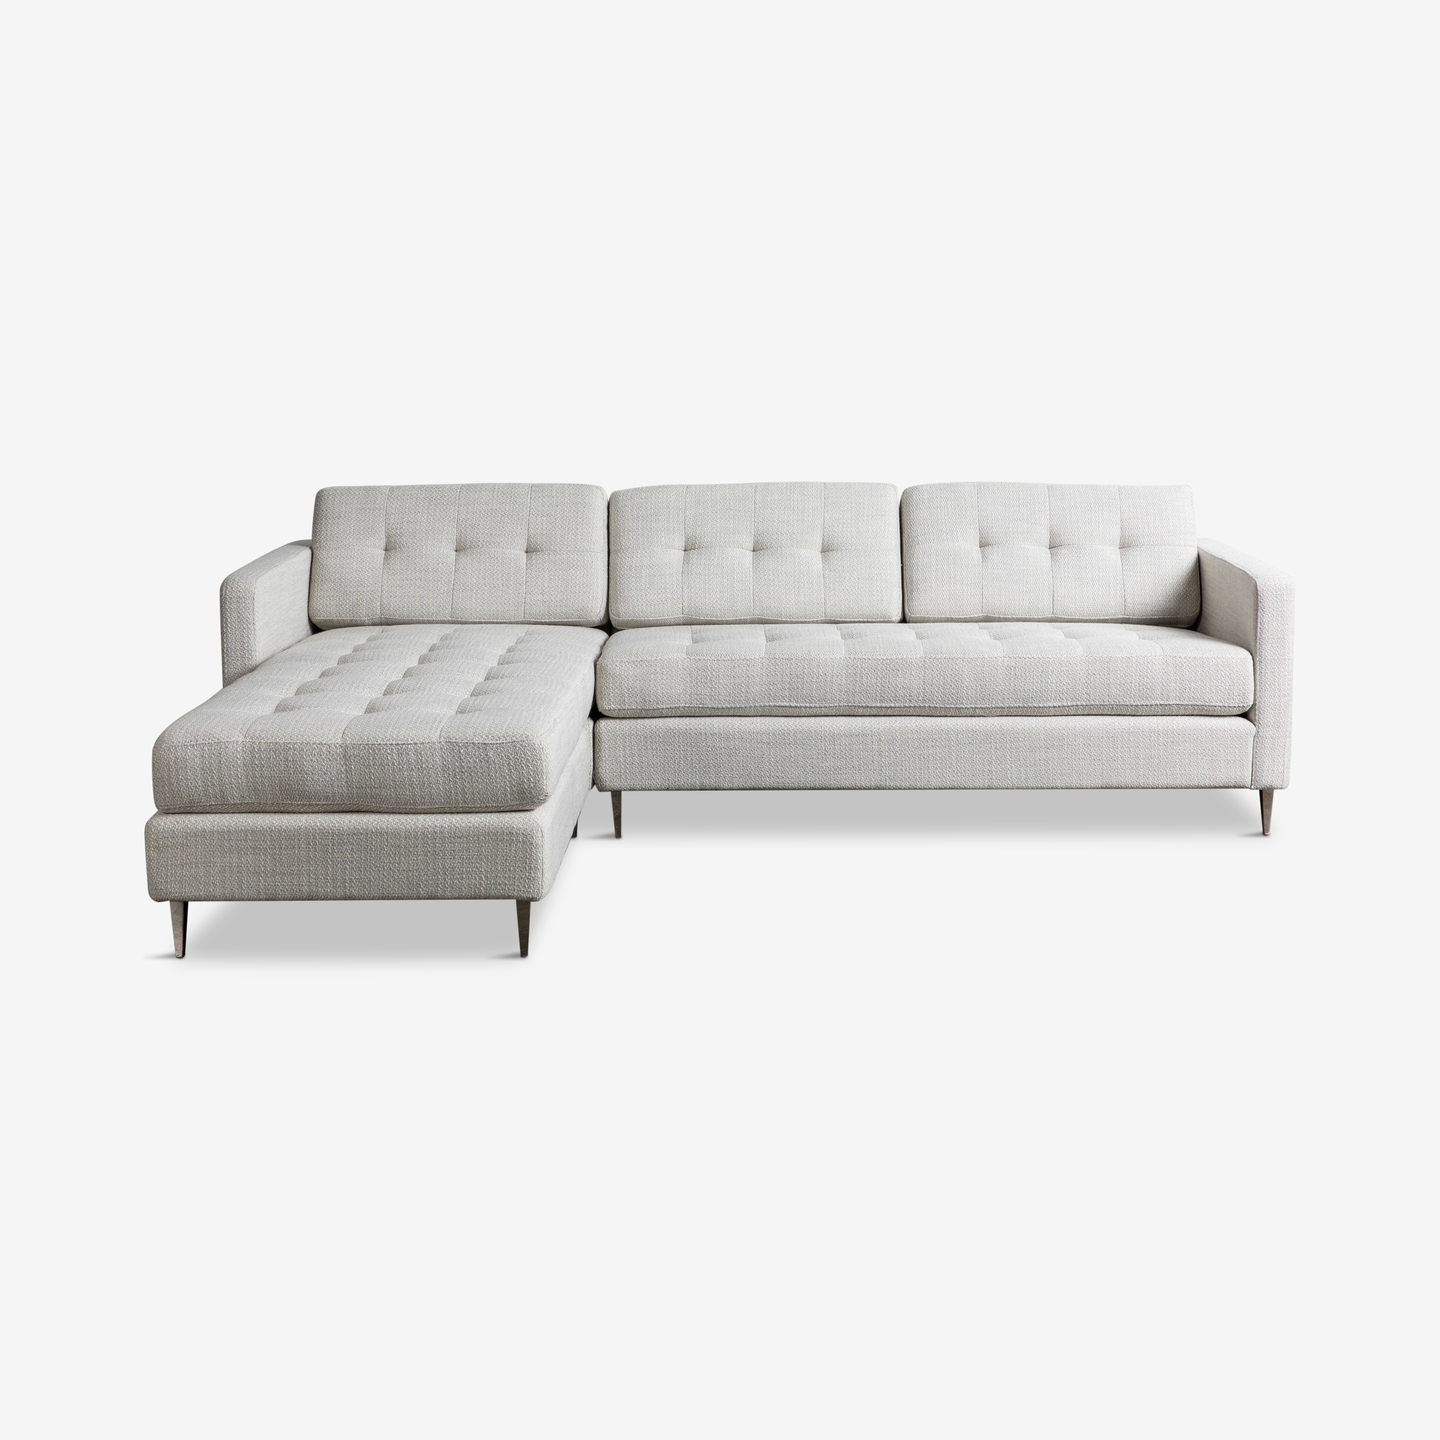 367_Ditto-II-Grey-Mist-Tufted-Sectional-Sofa_Front 2020